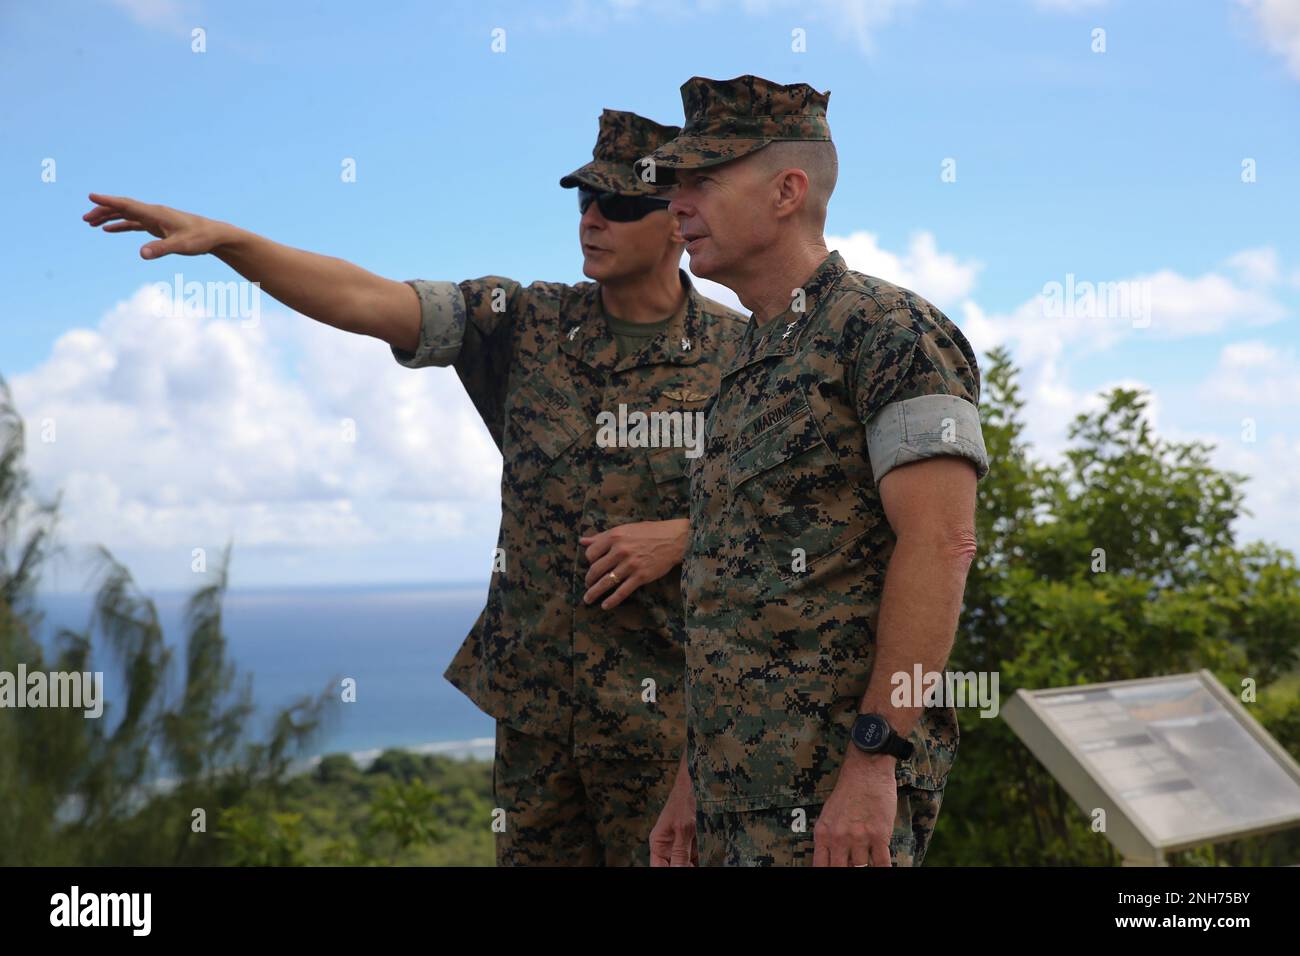 U.S. Marine Corps Col. Christopher L. Bopp, commanding officer for Marine Corps Base (MCB) Camp Blaz, left, talks to Maj. Gen. Jay M. Bargeron, commanding general for 3rd Marine Division, right, during a visit to Guam, July 20, 2022. MCB Camp Blaz is currently under construction and will allow the Marine Corps to maintain a forward presence in the Indo-Pacific region. Stock Photo